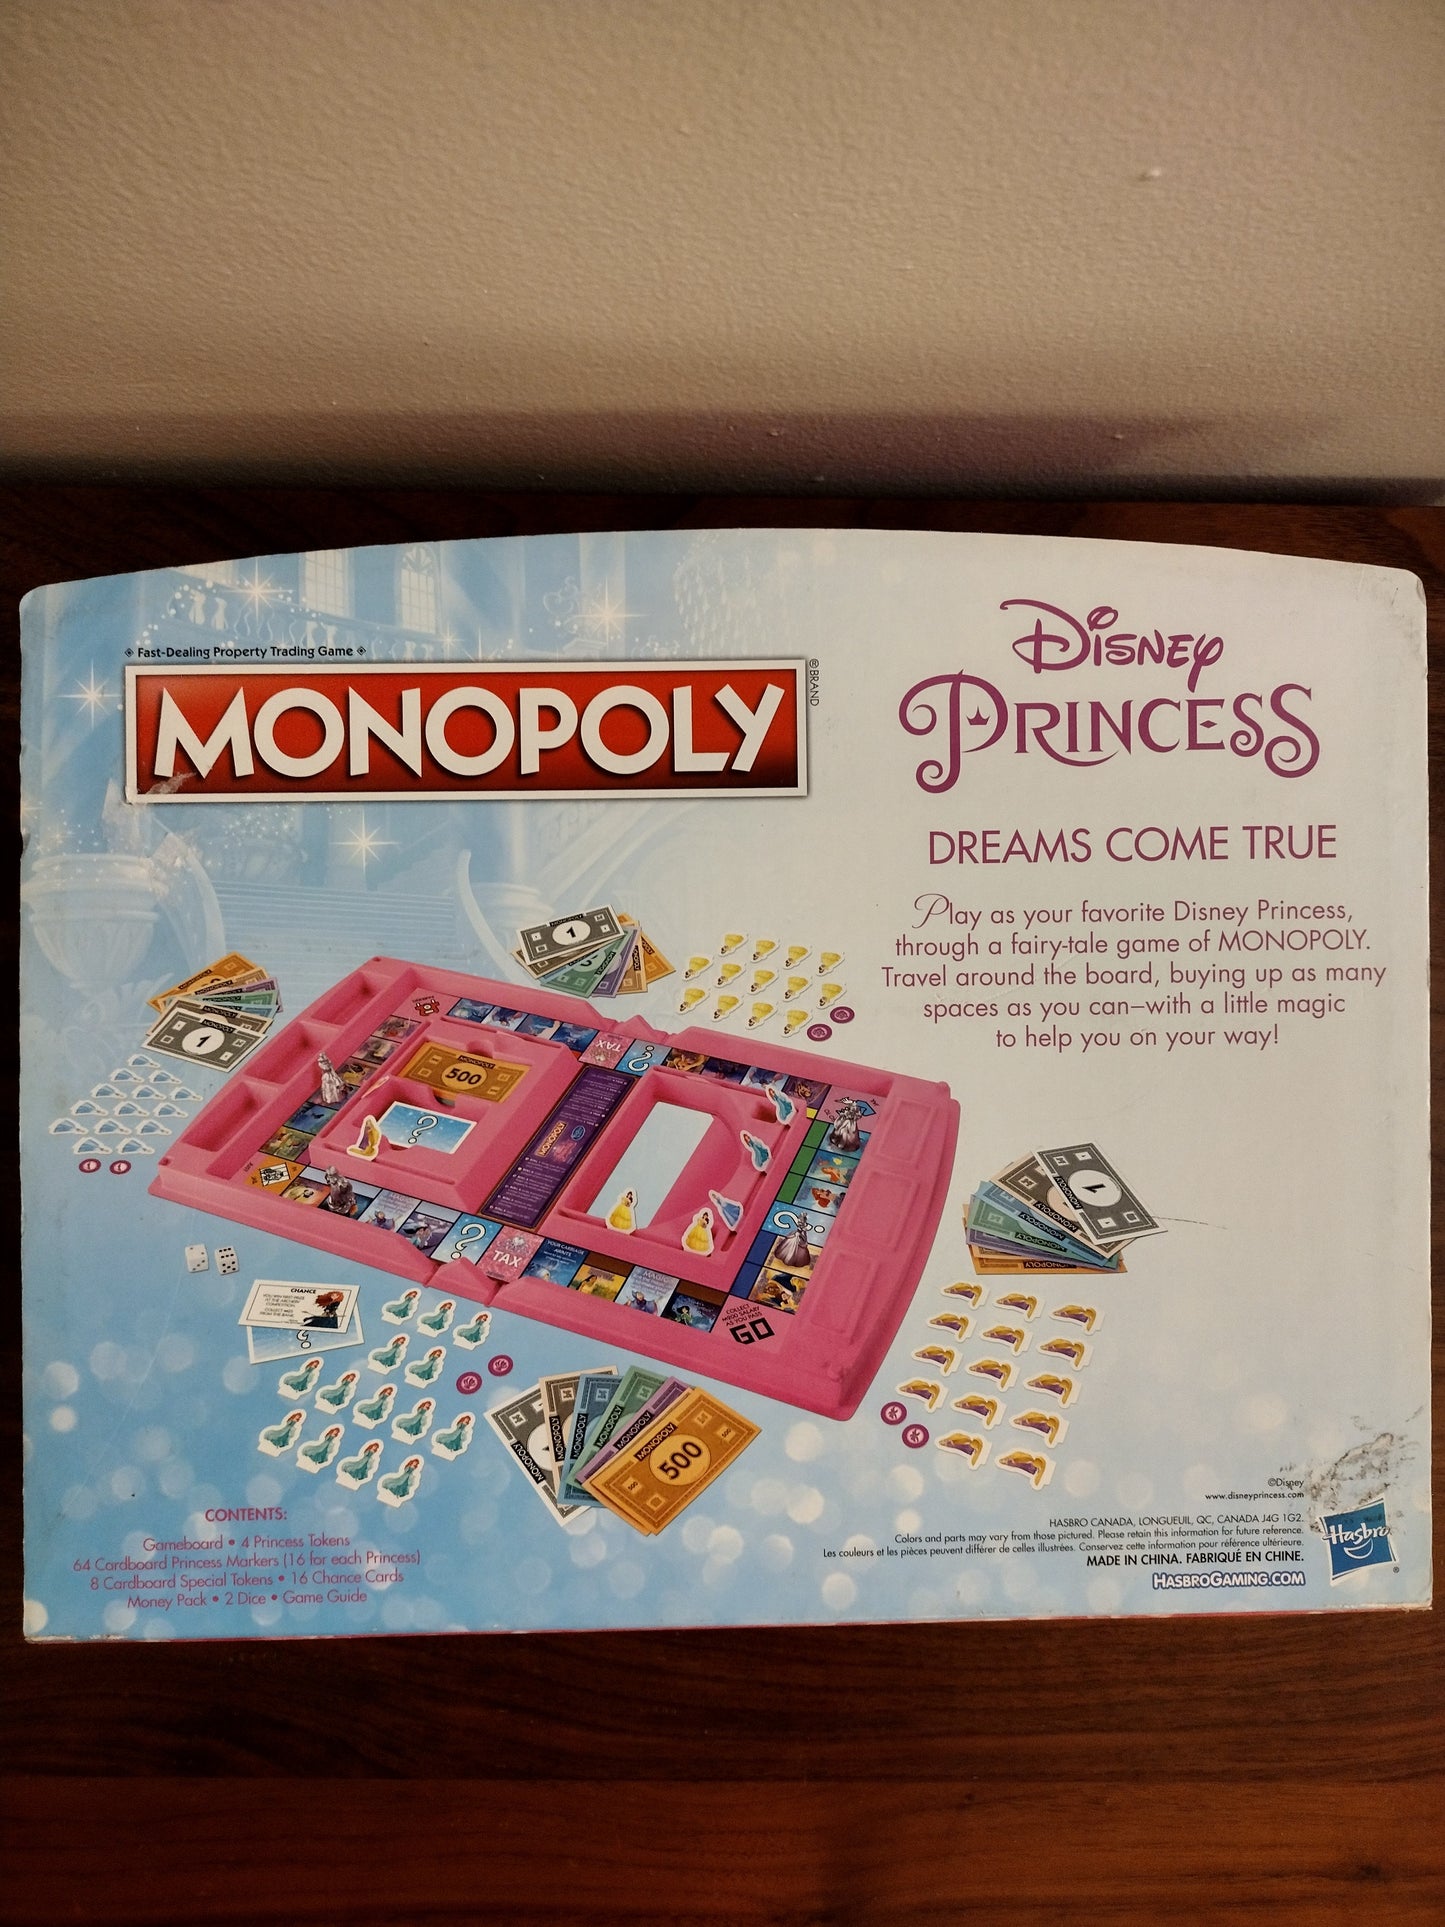 Monopoly Disney Princess Edition Open & Play Board Game Hasbro Ages 8+